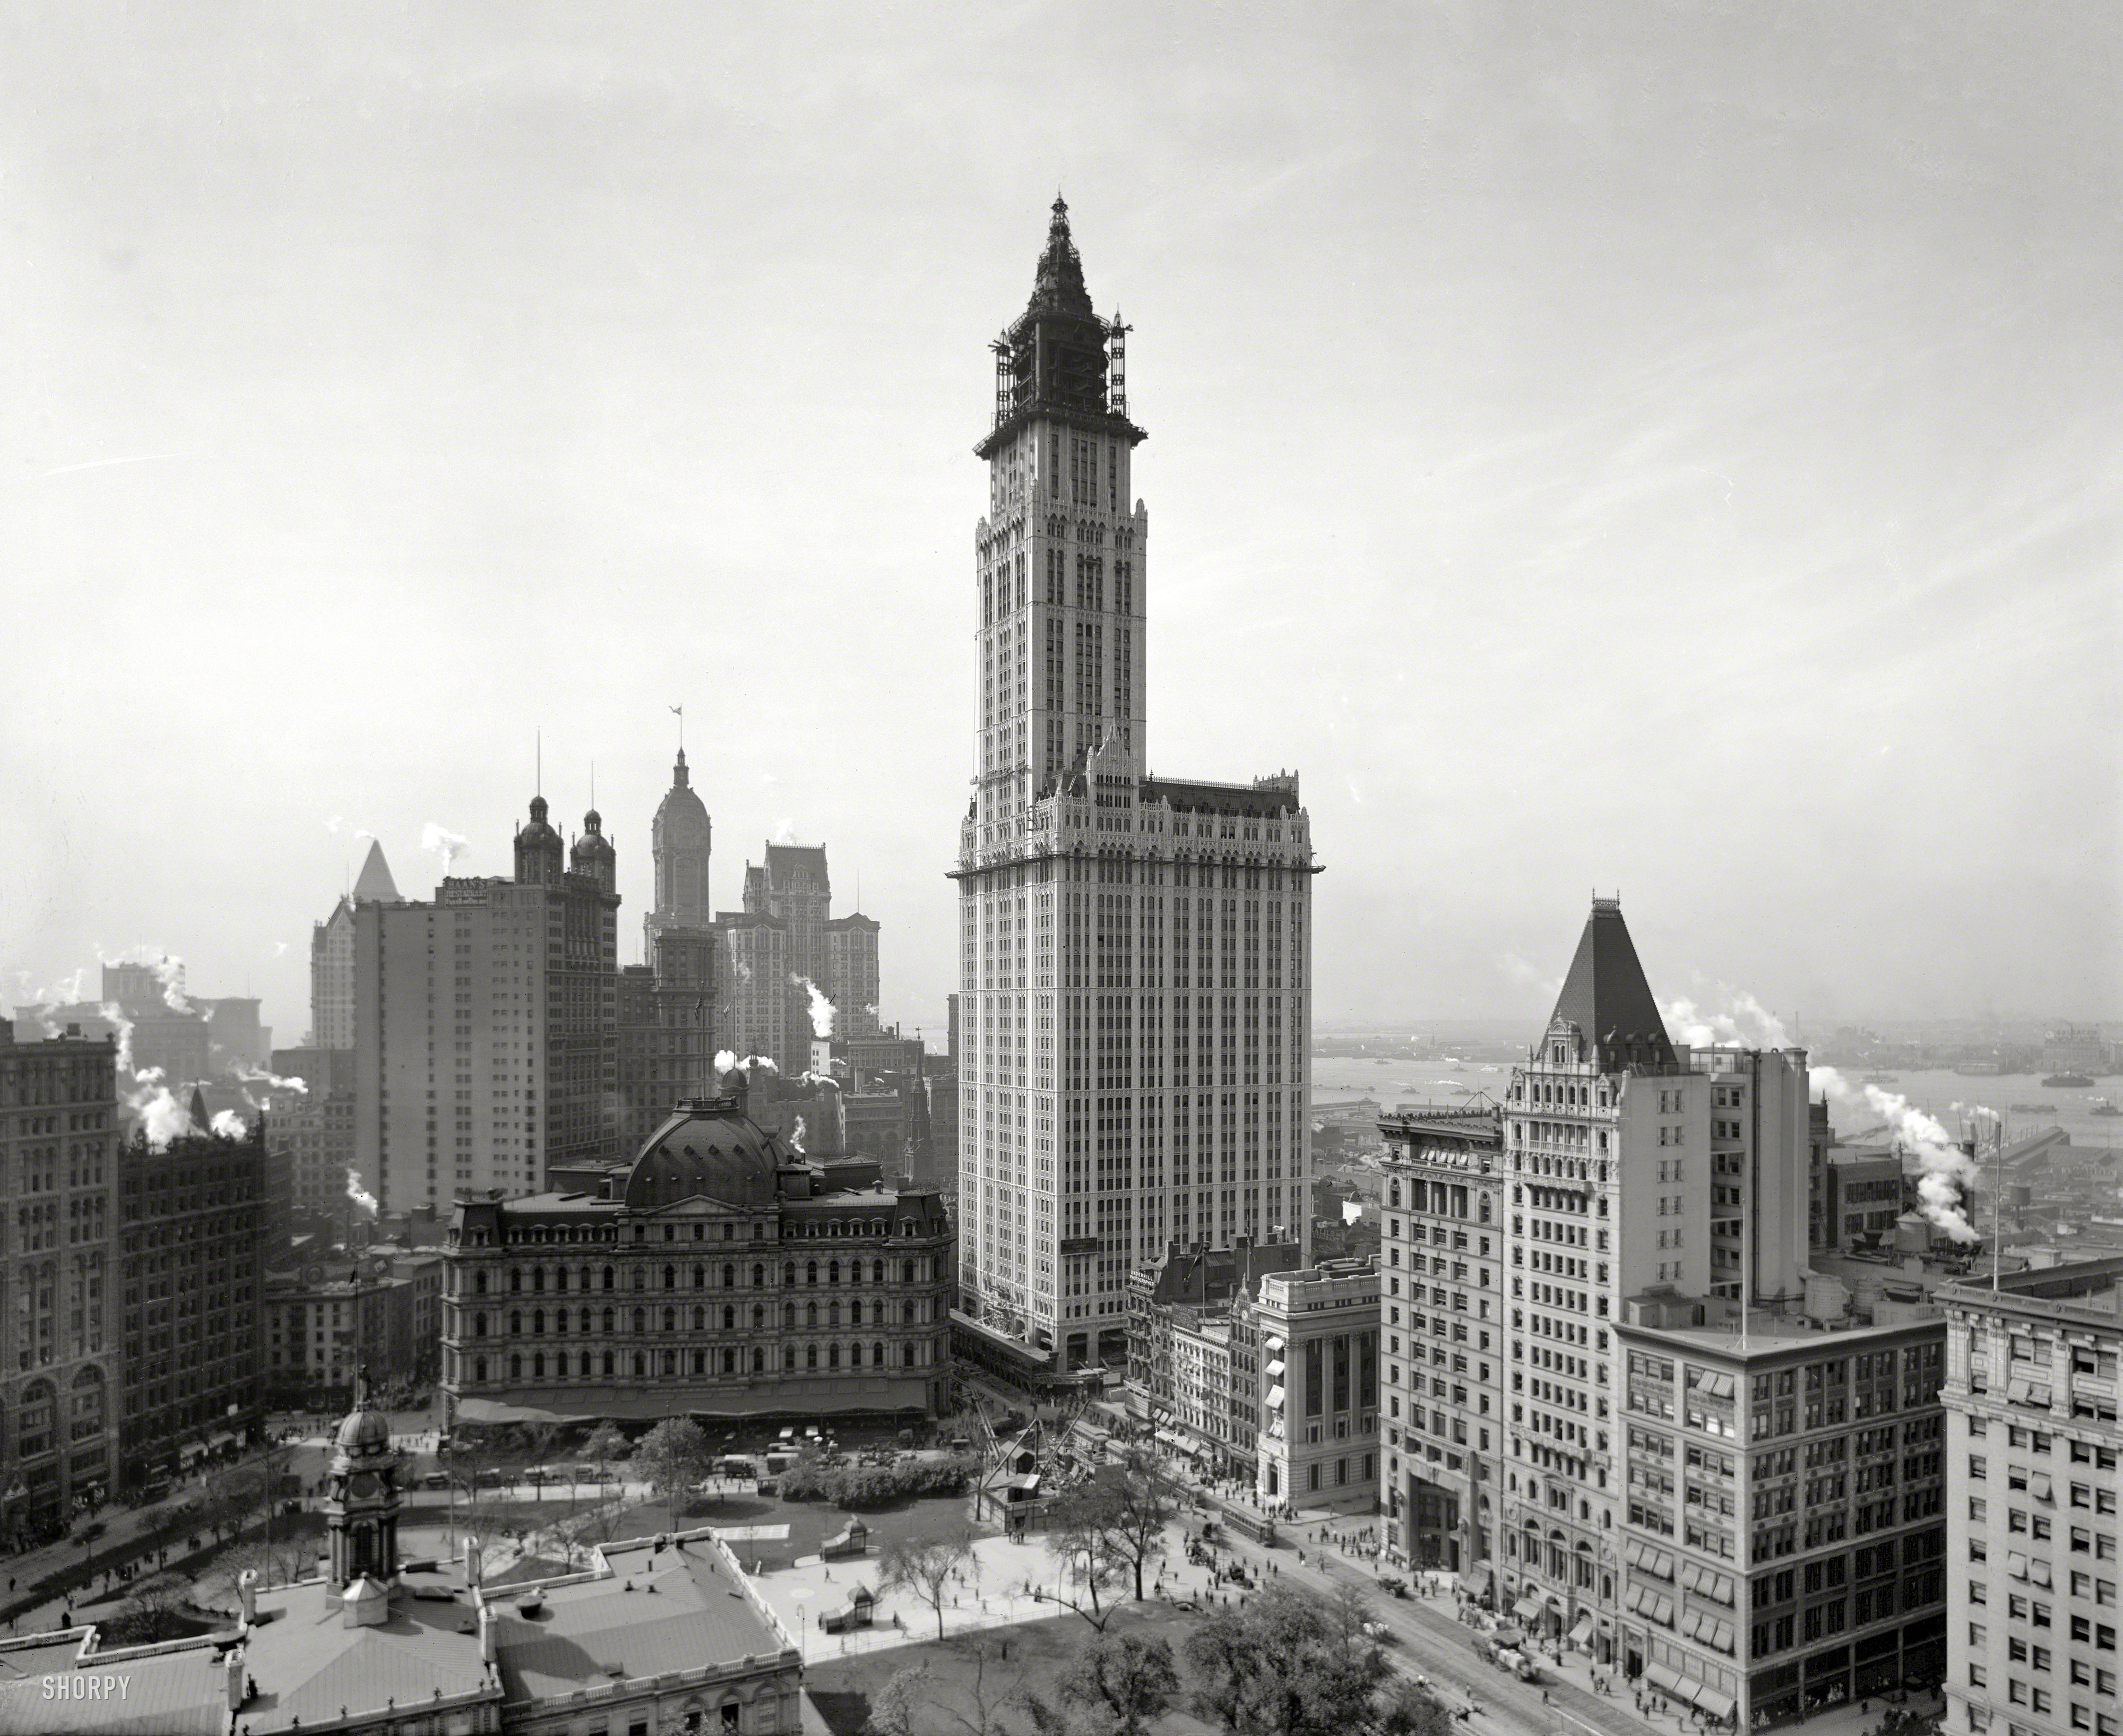 The Woolworth Building under construction in 1912. One hundred years later, the top 30 floors of the former department store headquarters are being converted to 40 luxury apartments, with a five-story penthouse in the cupola. Other New York landmarks in this view include City Hall Park and its post office, as well as the Singer and Park Row towers. 8x10 glass negative. View full size.